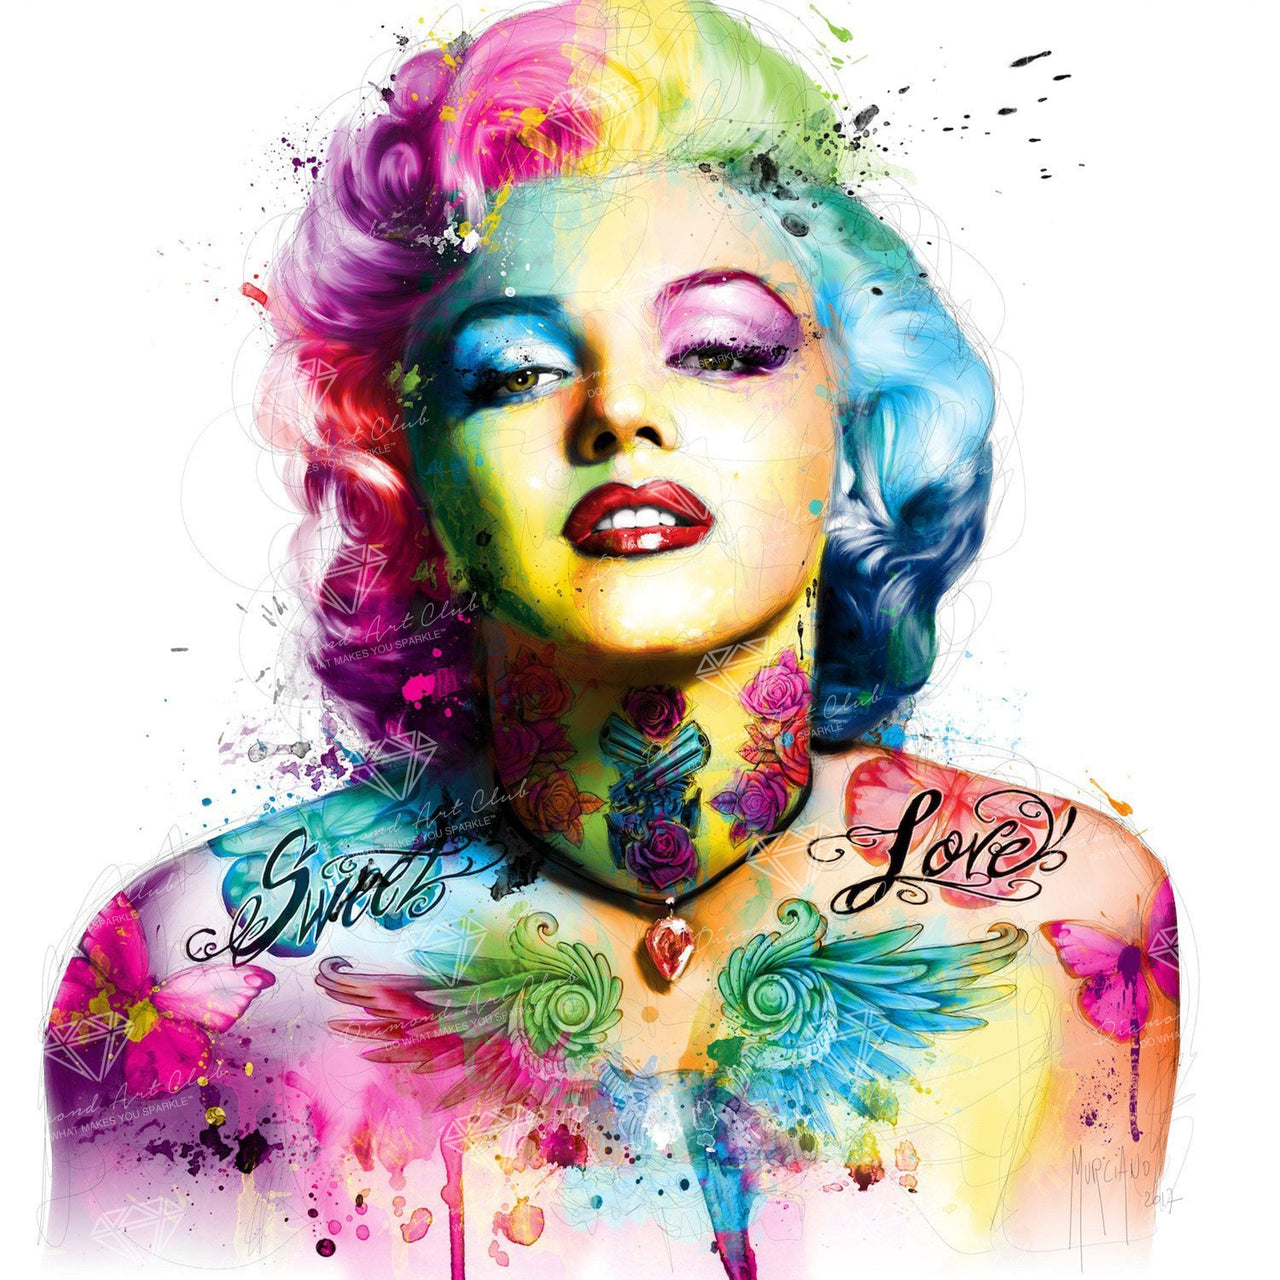 Diamond Painting Marilyn Monroe 20.5″ x 20.5″ (52cm x 52cm) / Round With 39 Colors including 1 AB / 33,857